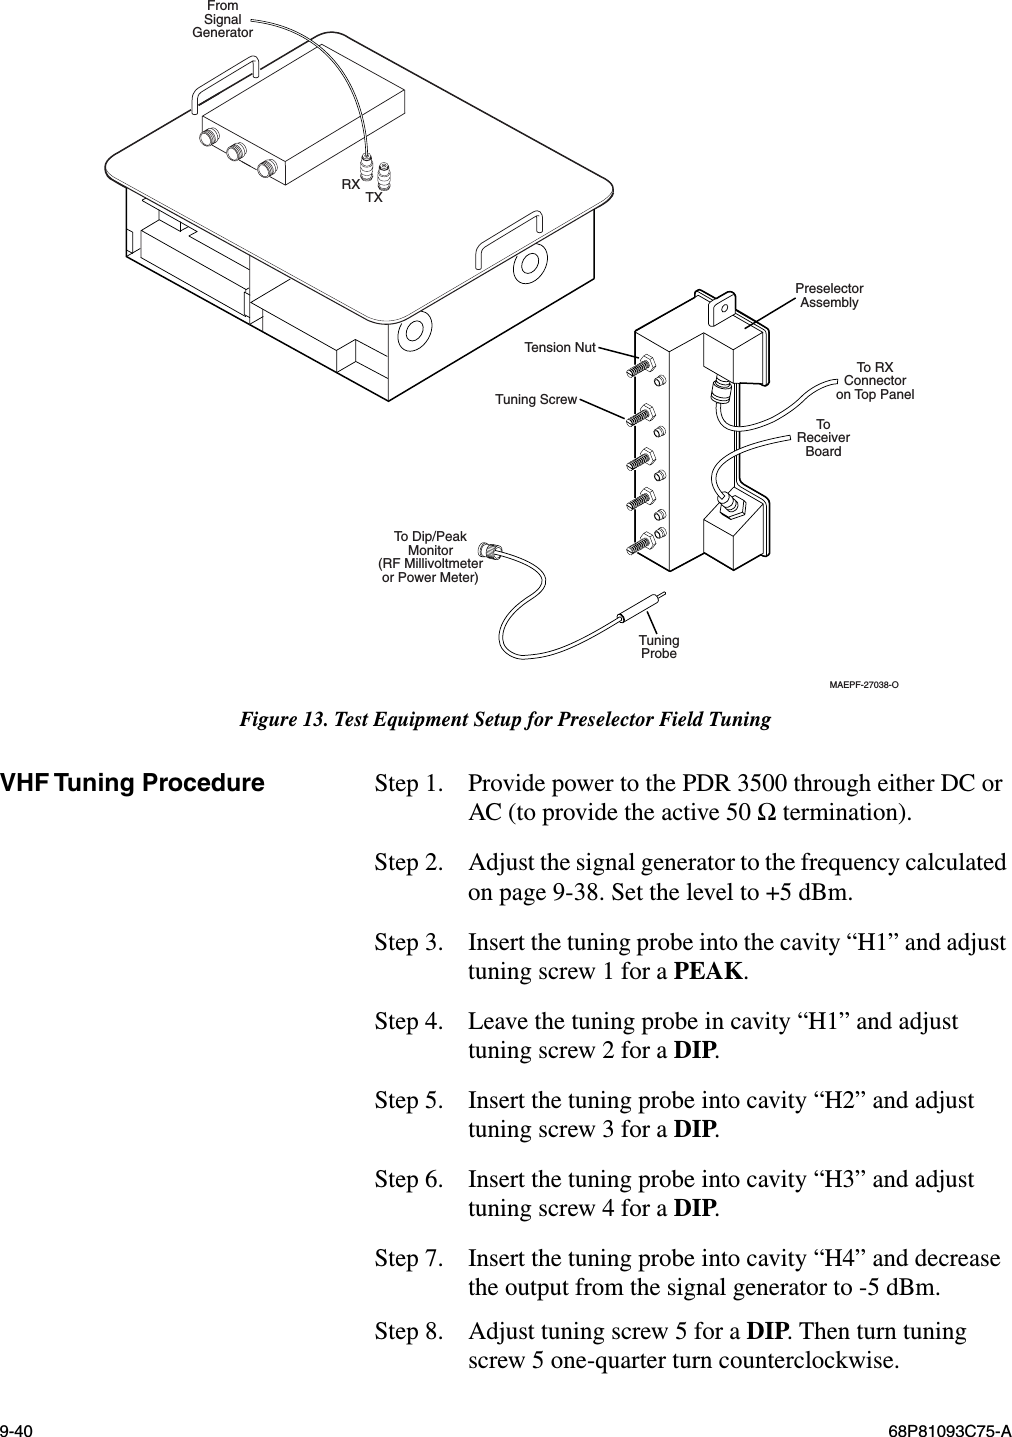 9-40 68P81093C75-AVHF Tuning Procedure Step 1.  Provide power to the PDR 3500 through either DC or AC (to provide the active 50 Ω termination).Step 2.  Adjust the signal generator to the frequency calculated on page 9-38. Set the level to +5 dBm.Step 3.  Insert the tuning probe into the cavity “H1” and adjust tuning screw 1 for a PEAK.Step 4.  Leave the tuning probe in cavity “H1” and adjust tuning screw 2 for a DIP.Step 5.  Insert the tuning probe into cavity “H2” and adjust tuning screw 3 for a DIP.Step 6.  Insert the tuning probe into cavity “H3” and adjust tuning screw 4 for a DIP.Step 7.  Insert the tuning probe into cavity “H4” and decrease the output from the signal generator to -5 dBm.Step 8.  Adjust tuning screw 5 for a DIP. Then turn tuning screw 5 one-quarter turn counterclockwise.Figure 13. Test Equipment Setup for Preselector Field TuningTension NutTuning ScrewTo Dip/PeakMonitor(RF Millivoltmeteror Power Meter)FromSignalGeneratorTuningProbeToReceiverBoardTo RXConnectoron Top PanelPreselectorAssemblyRX TXMAEPF-27038-O